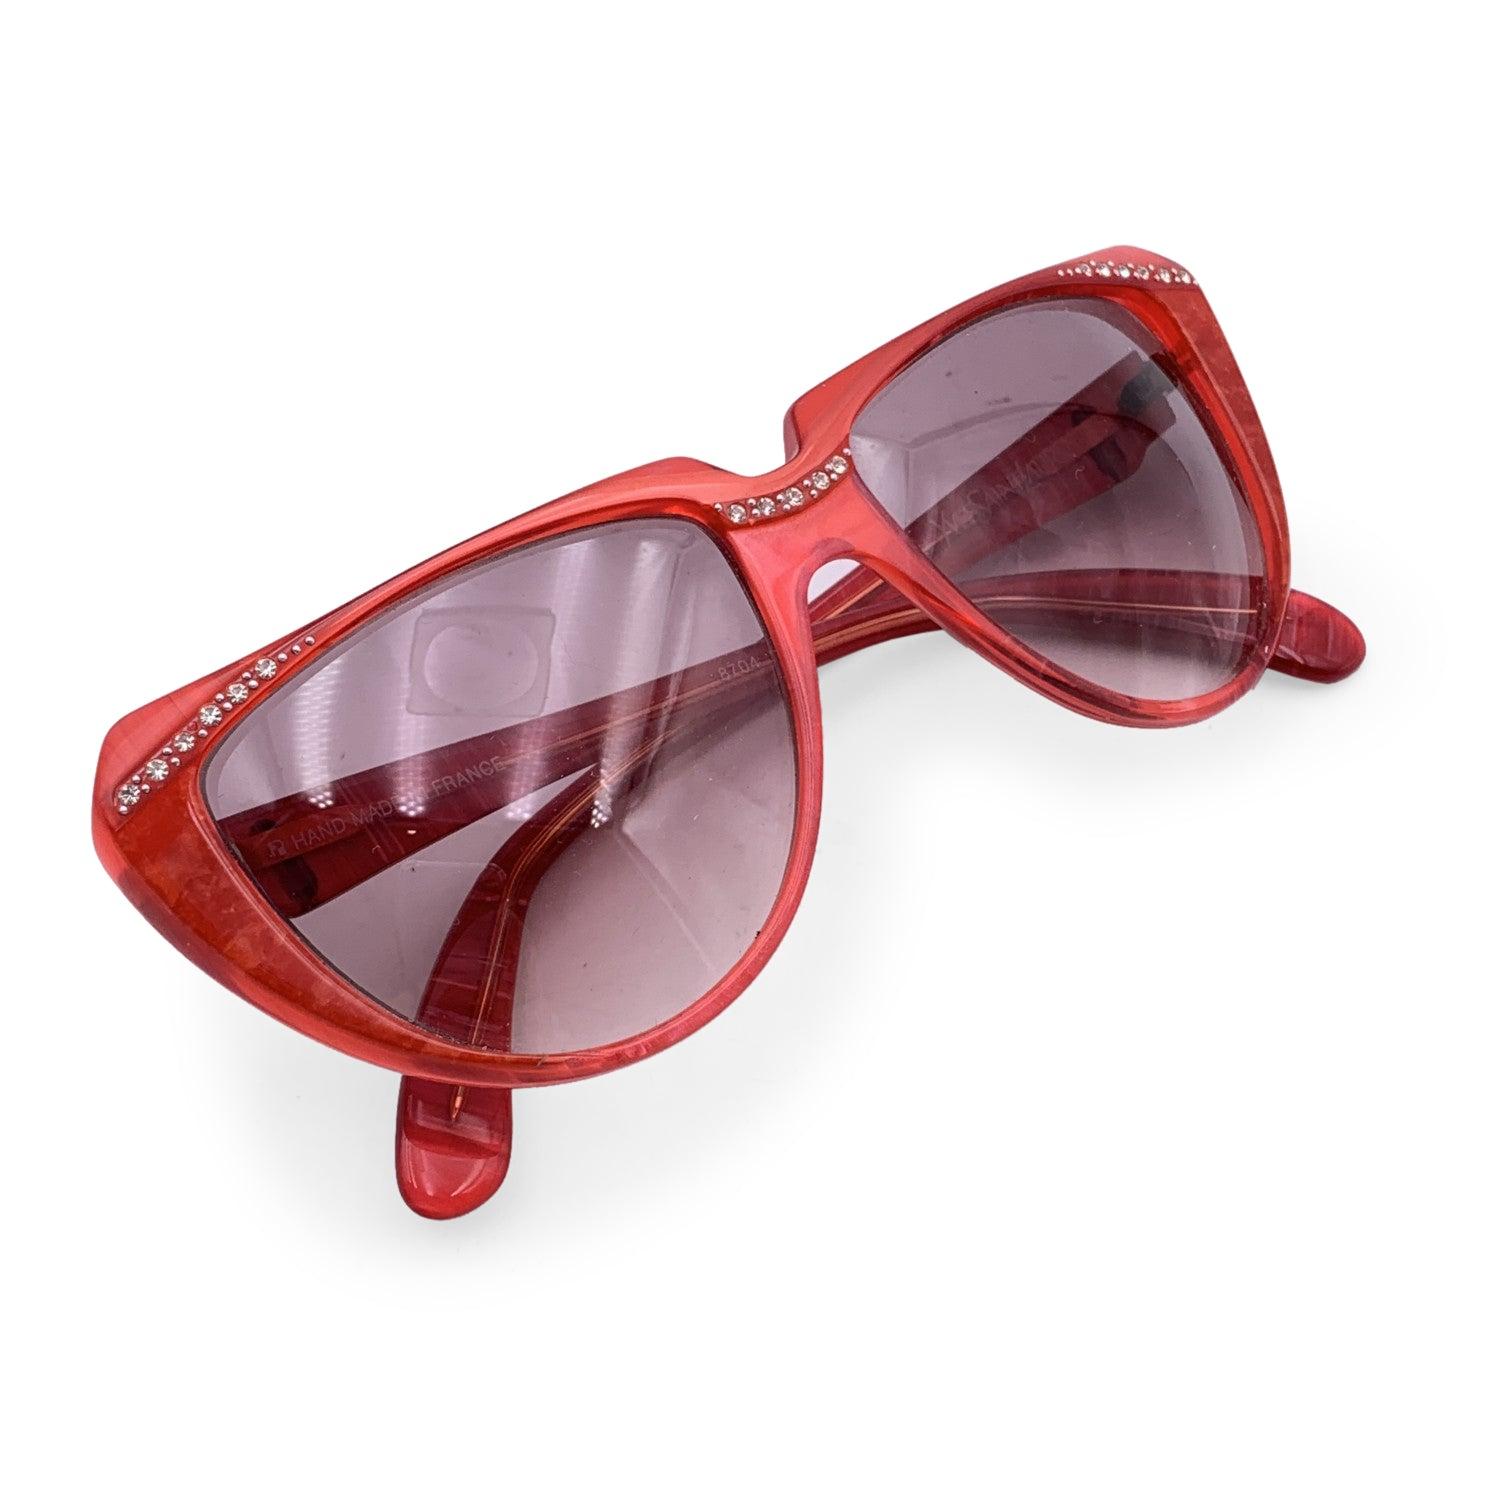 Cat-eye vintage sunglasses by YVES SAINT LAURENT from the 80s, Mod. 8704 P 74. Red frame embellished with small rhinestones on the nose bridge amd on corners. Hand-Made in France. YSL logos on the side. New 100% UV protection gradient lenses.